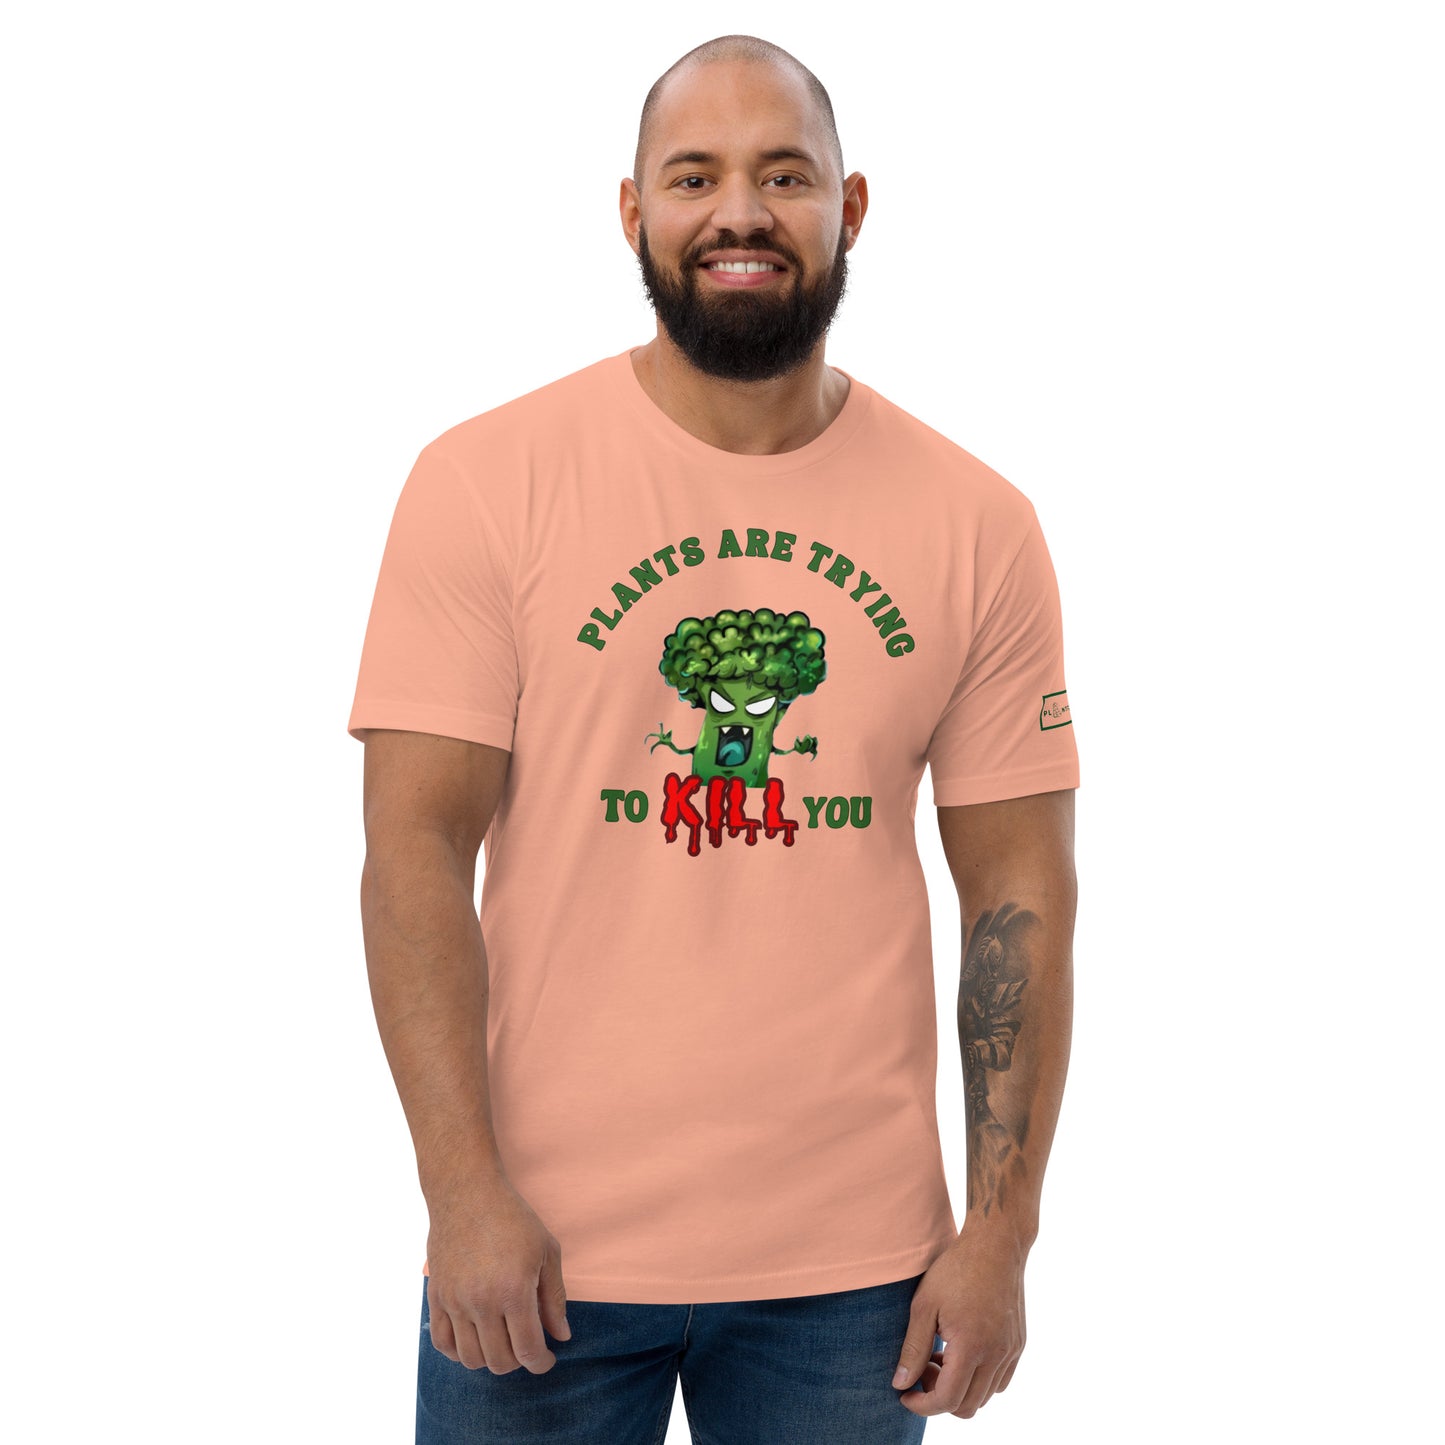 Plants Are Trying to K*ll You Men's Fitted T-shirt